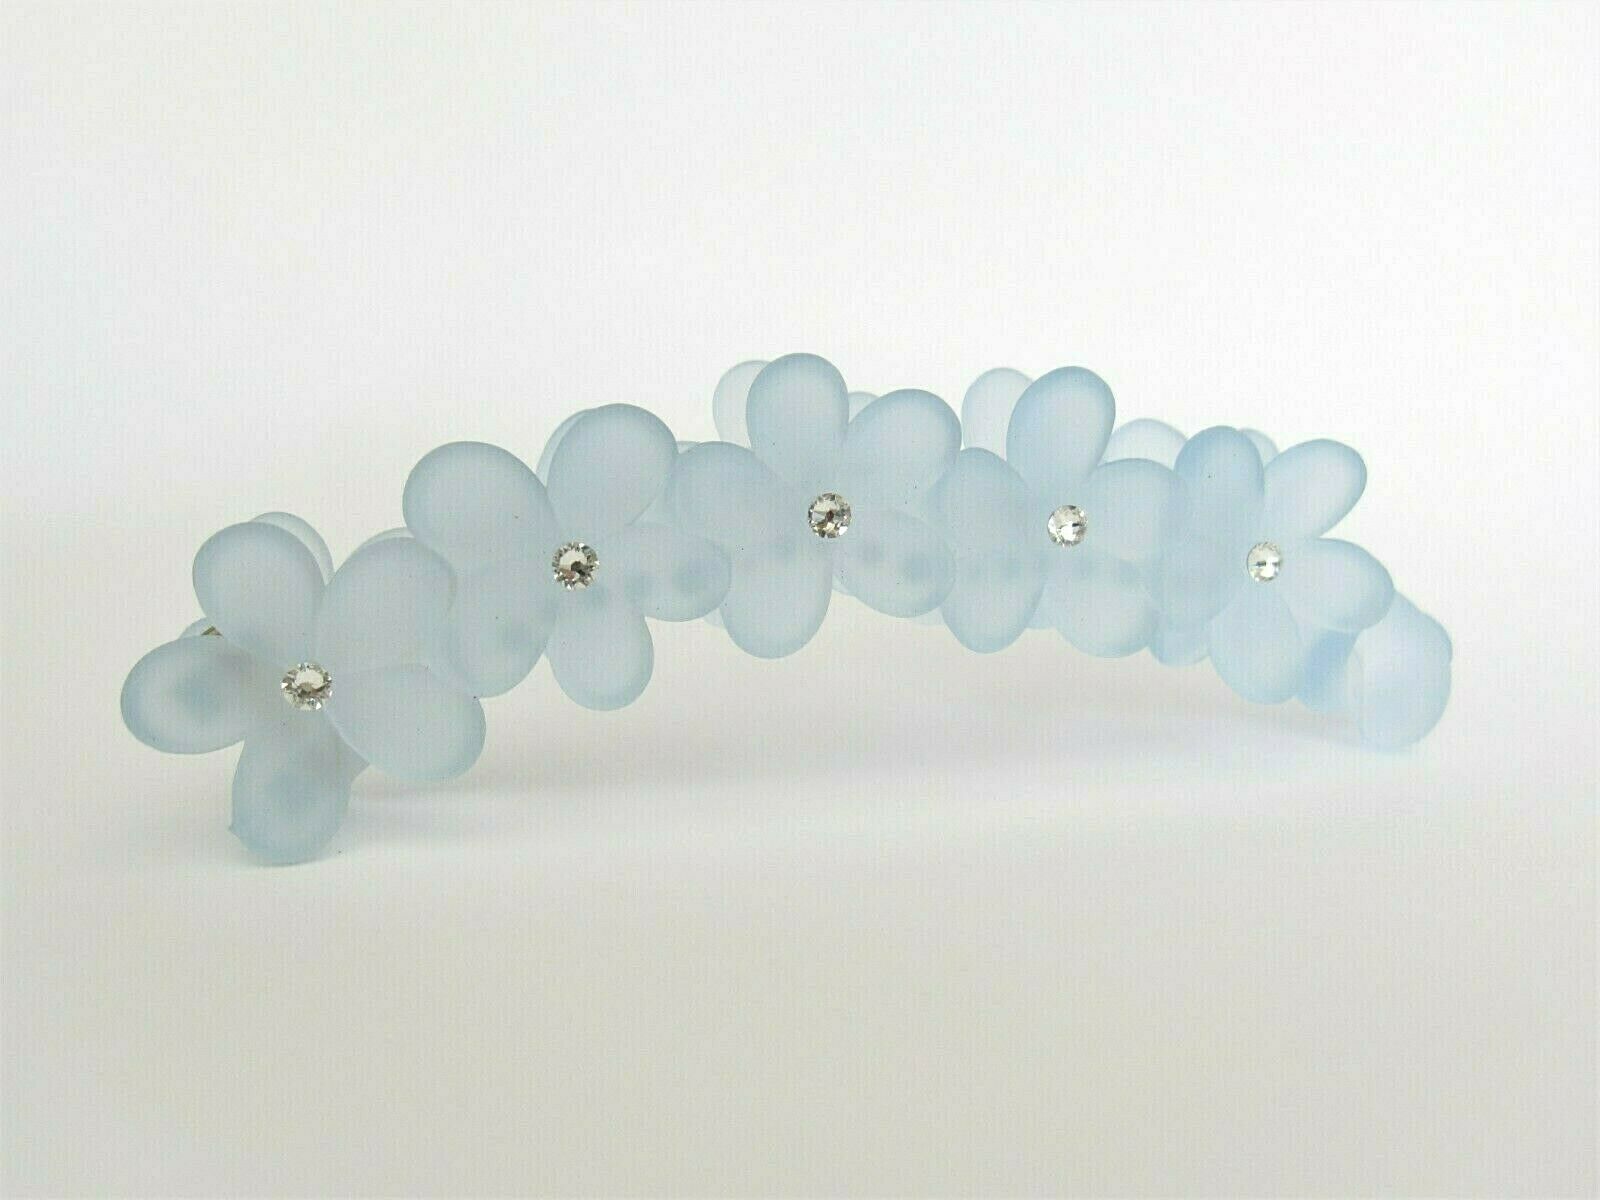 Powder blue frosted flower banana hair claw clips made with swarovski crystals